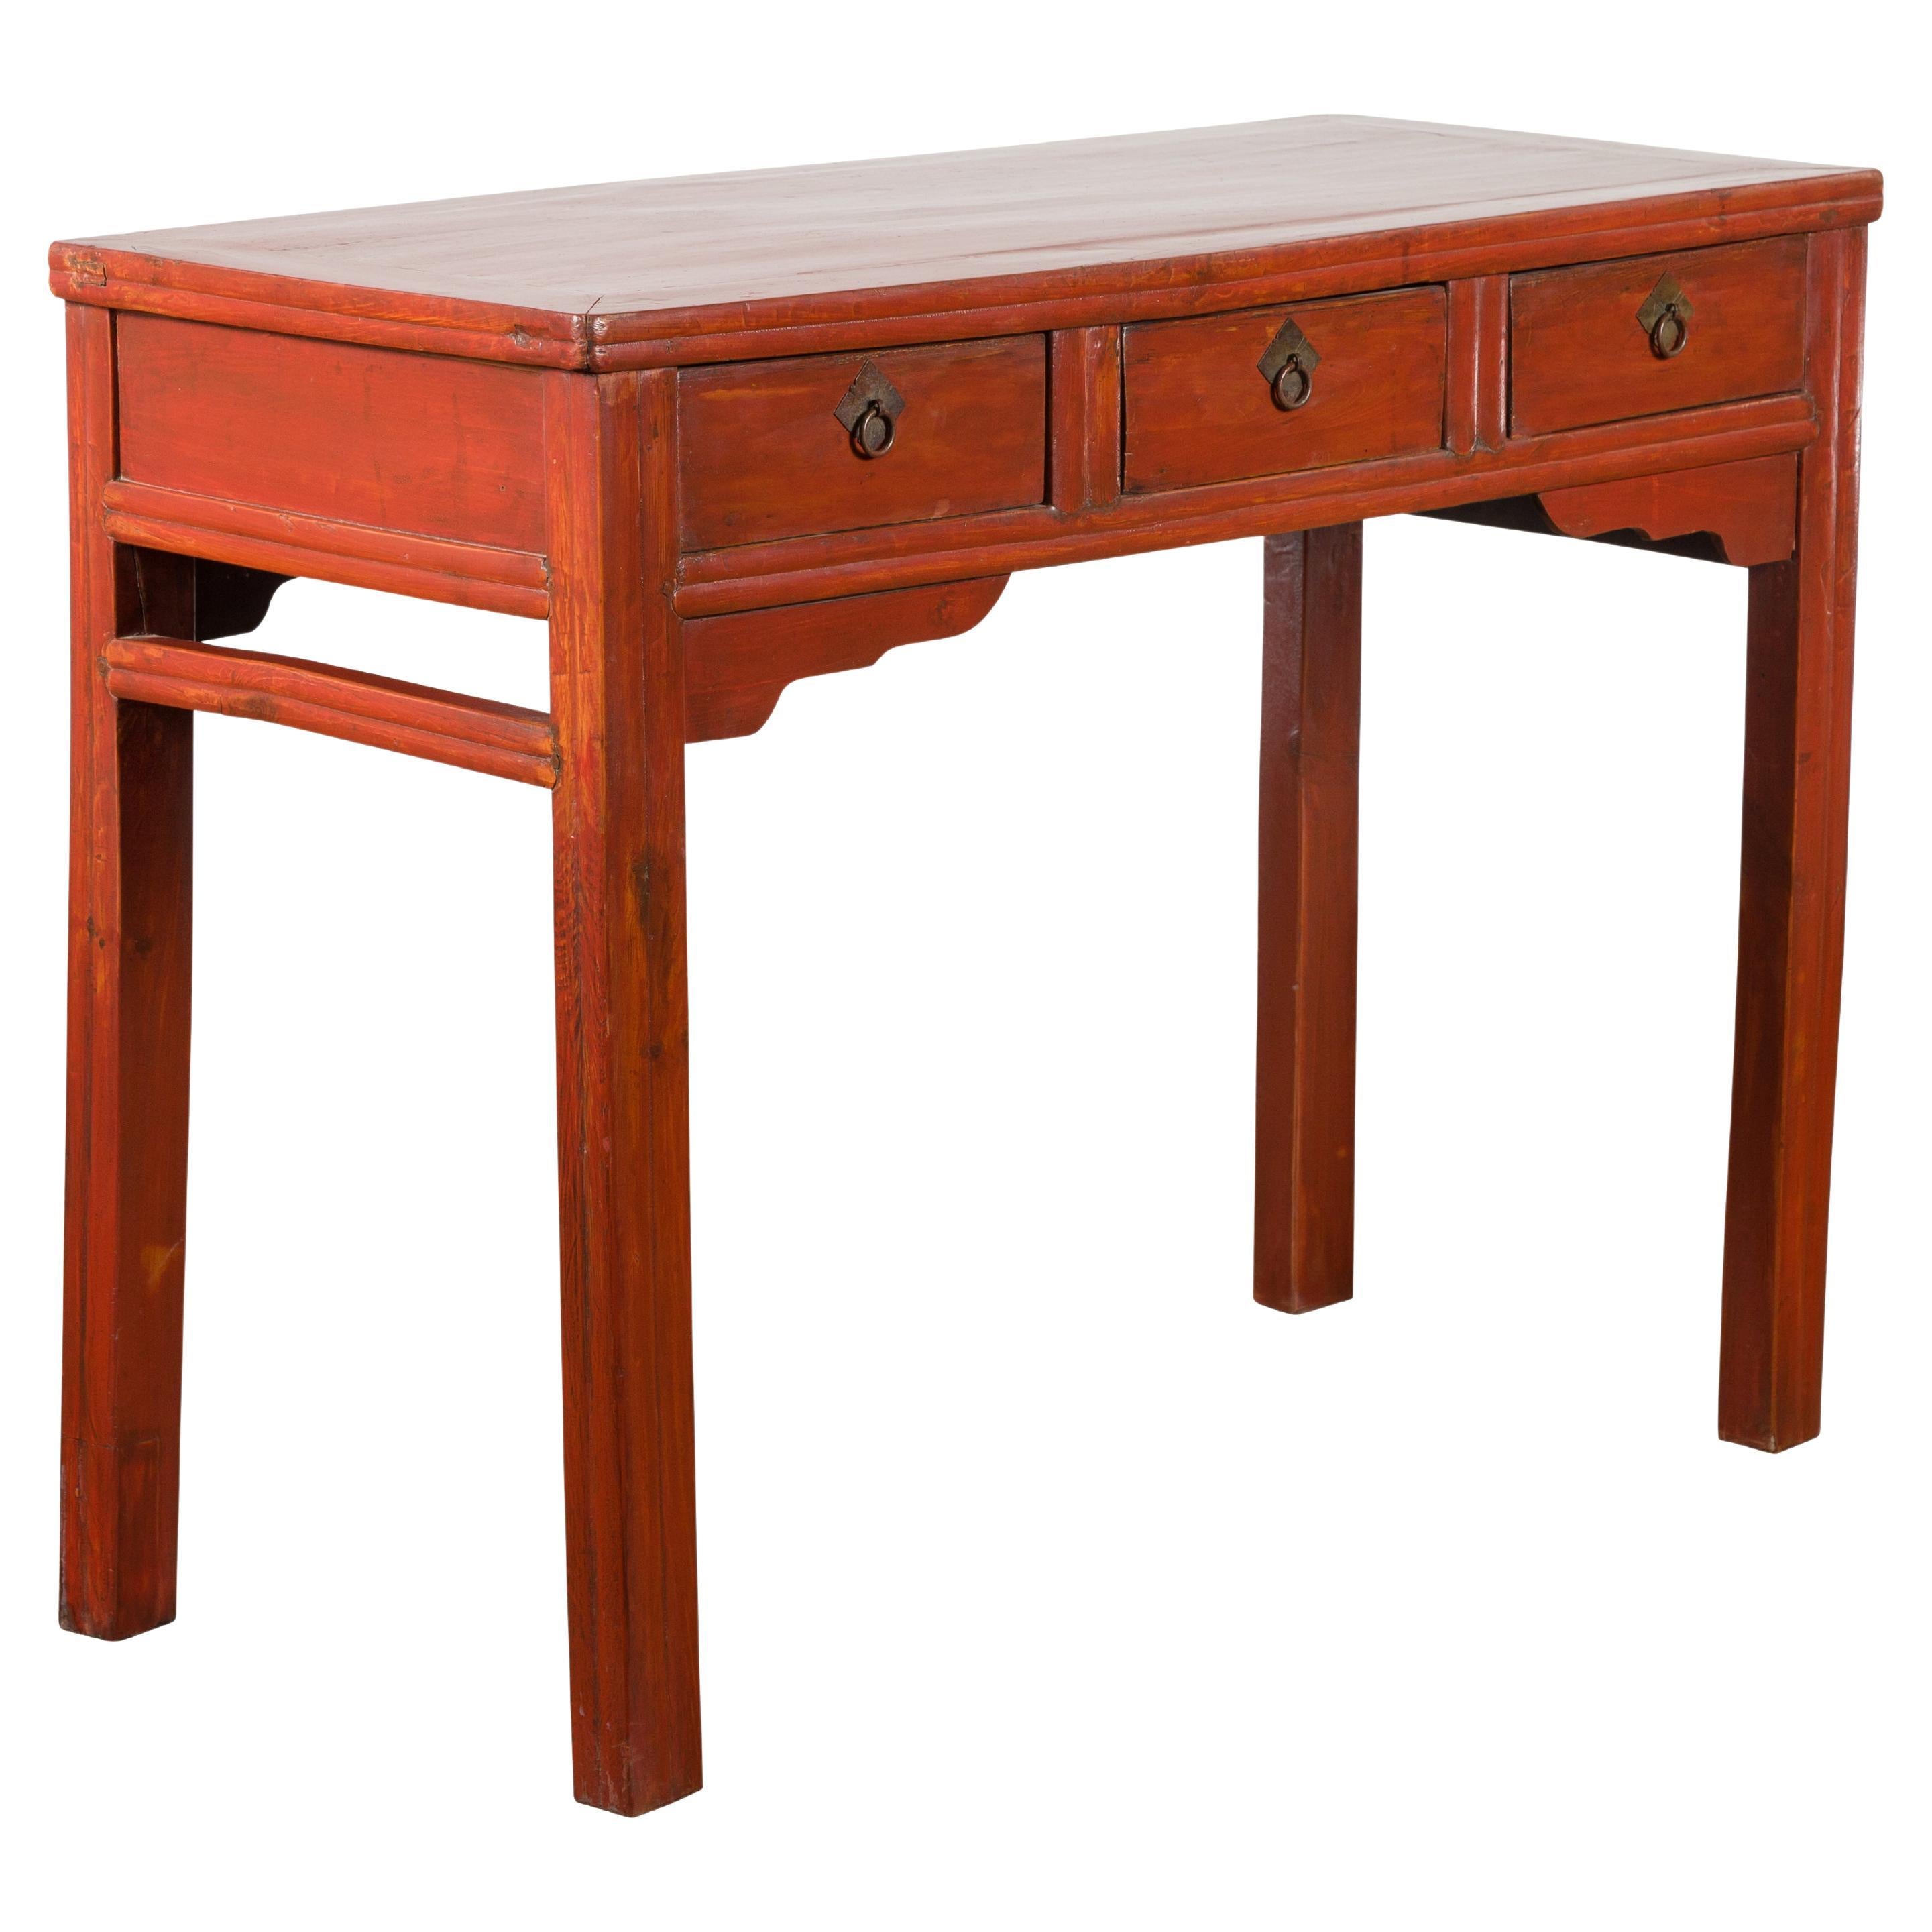 Chinese Qing Dynasty 19th Century Red Orange Lacquered Table with Three Drawers For Sale